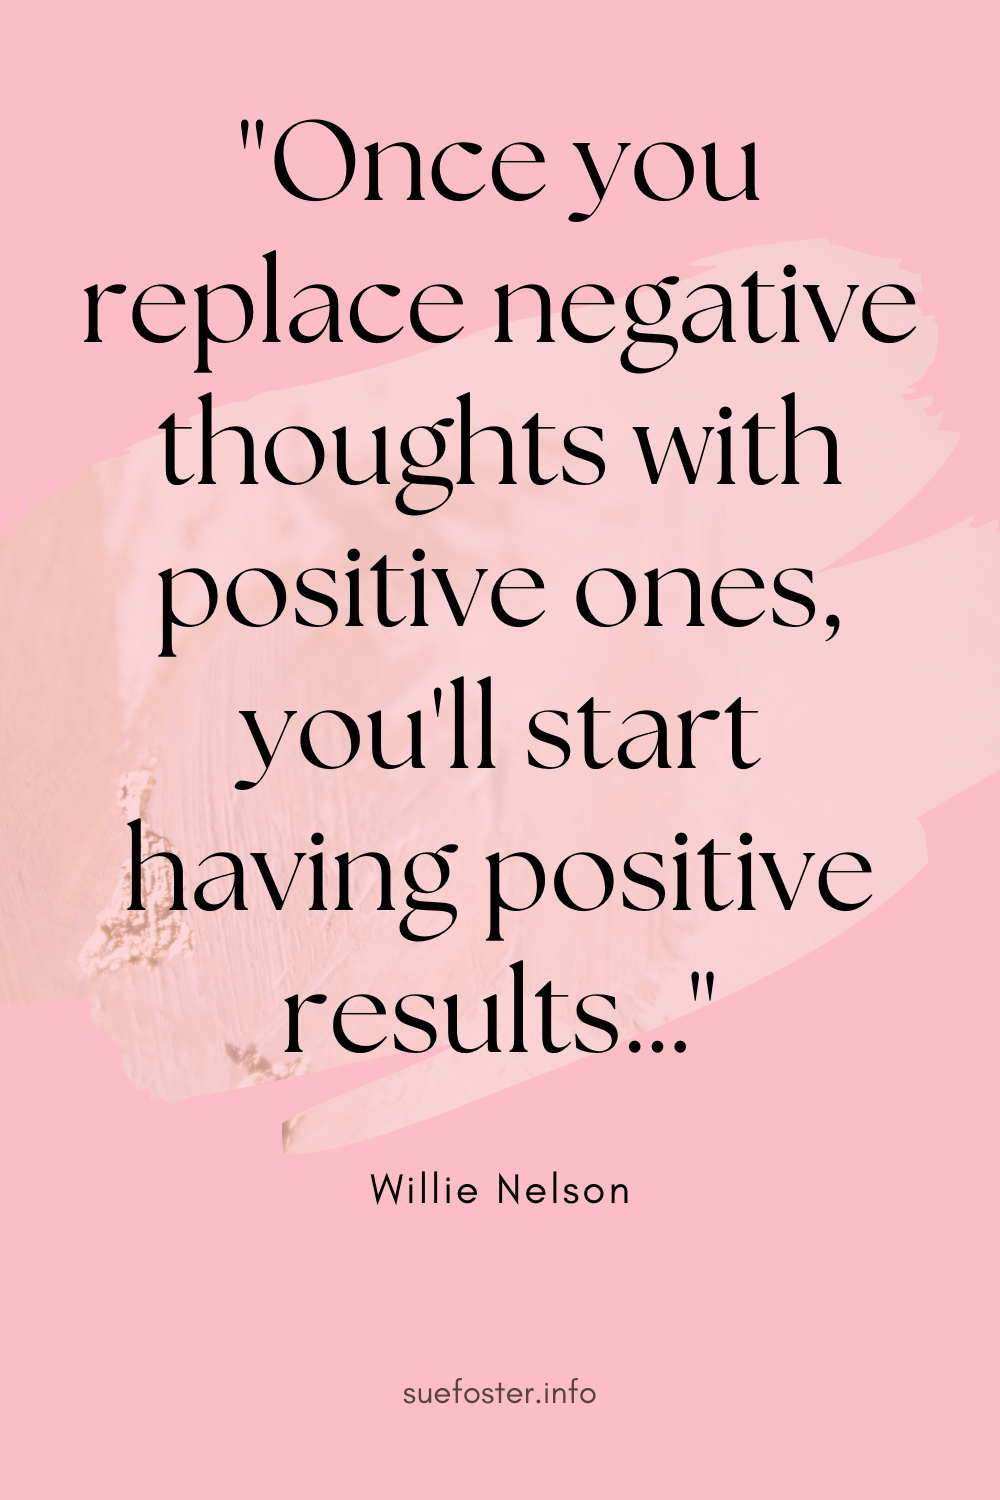 Once you replace negative thoughts with positive ones, you'll start having positive results… ~Willie Nelson